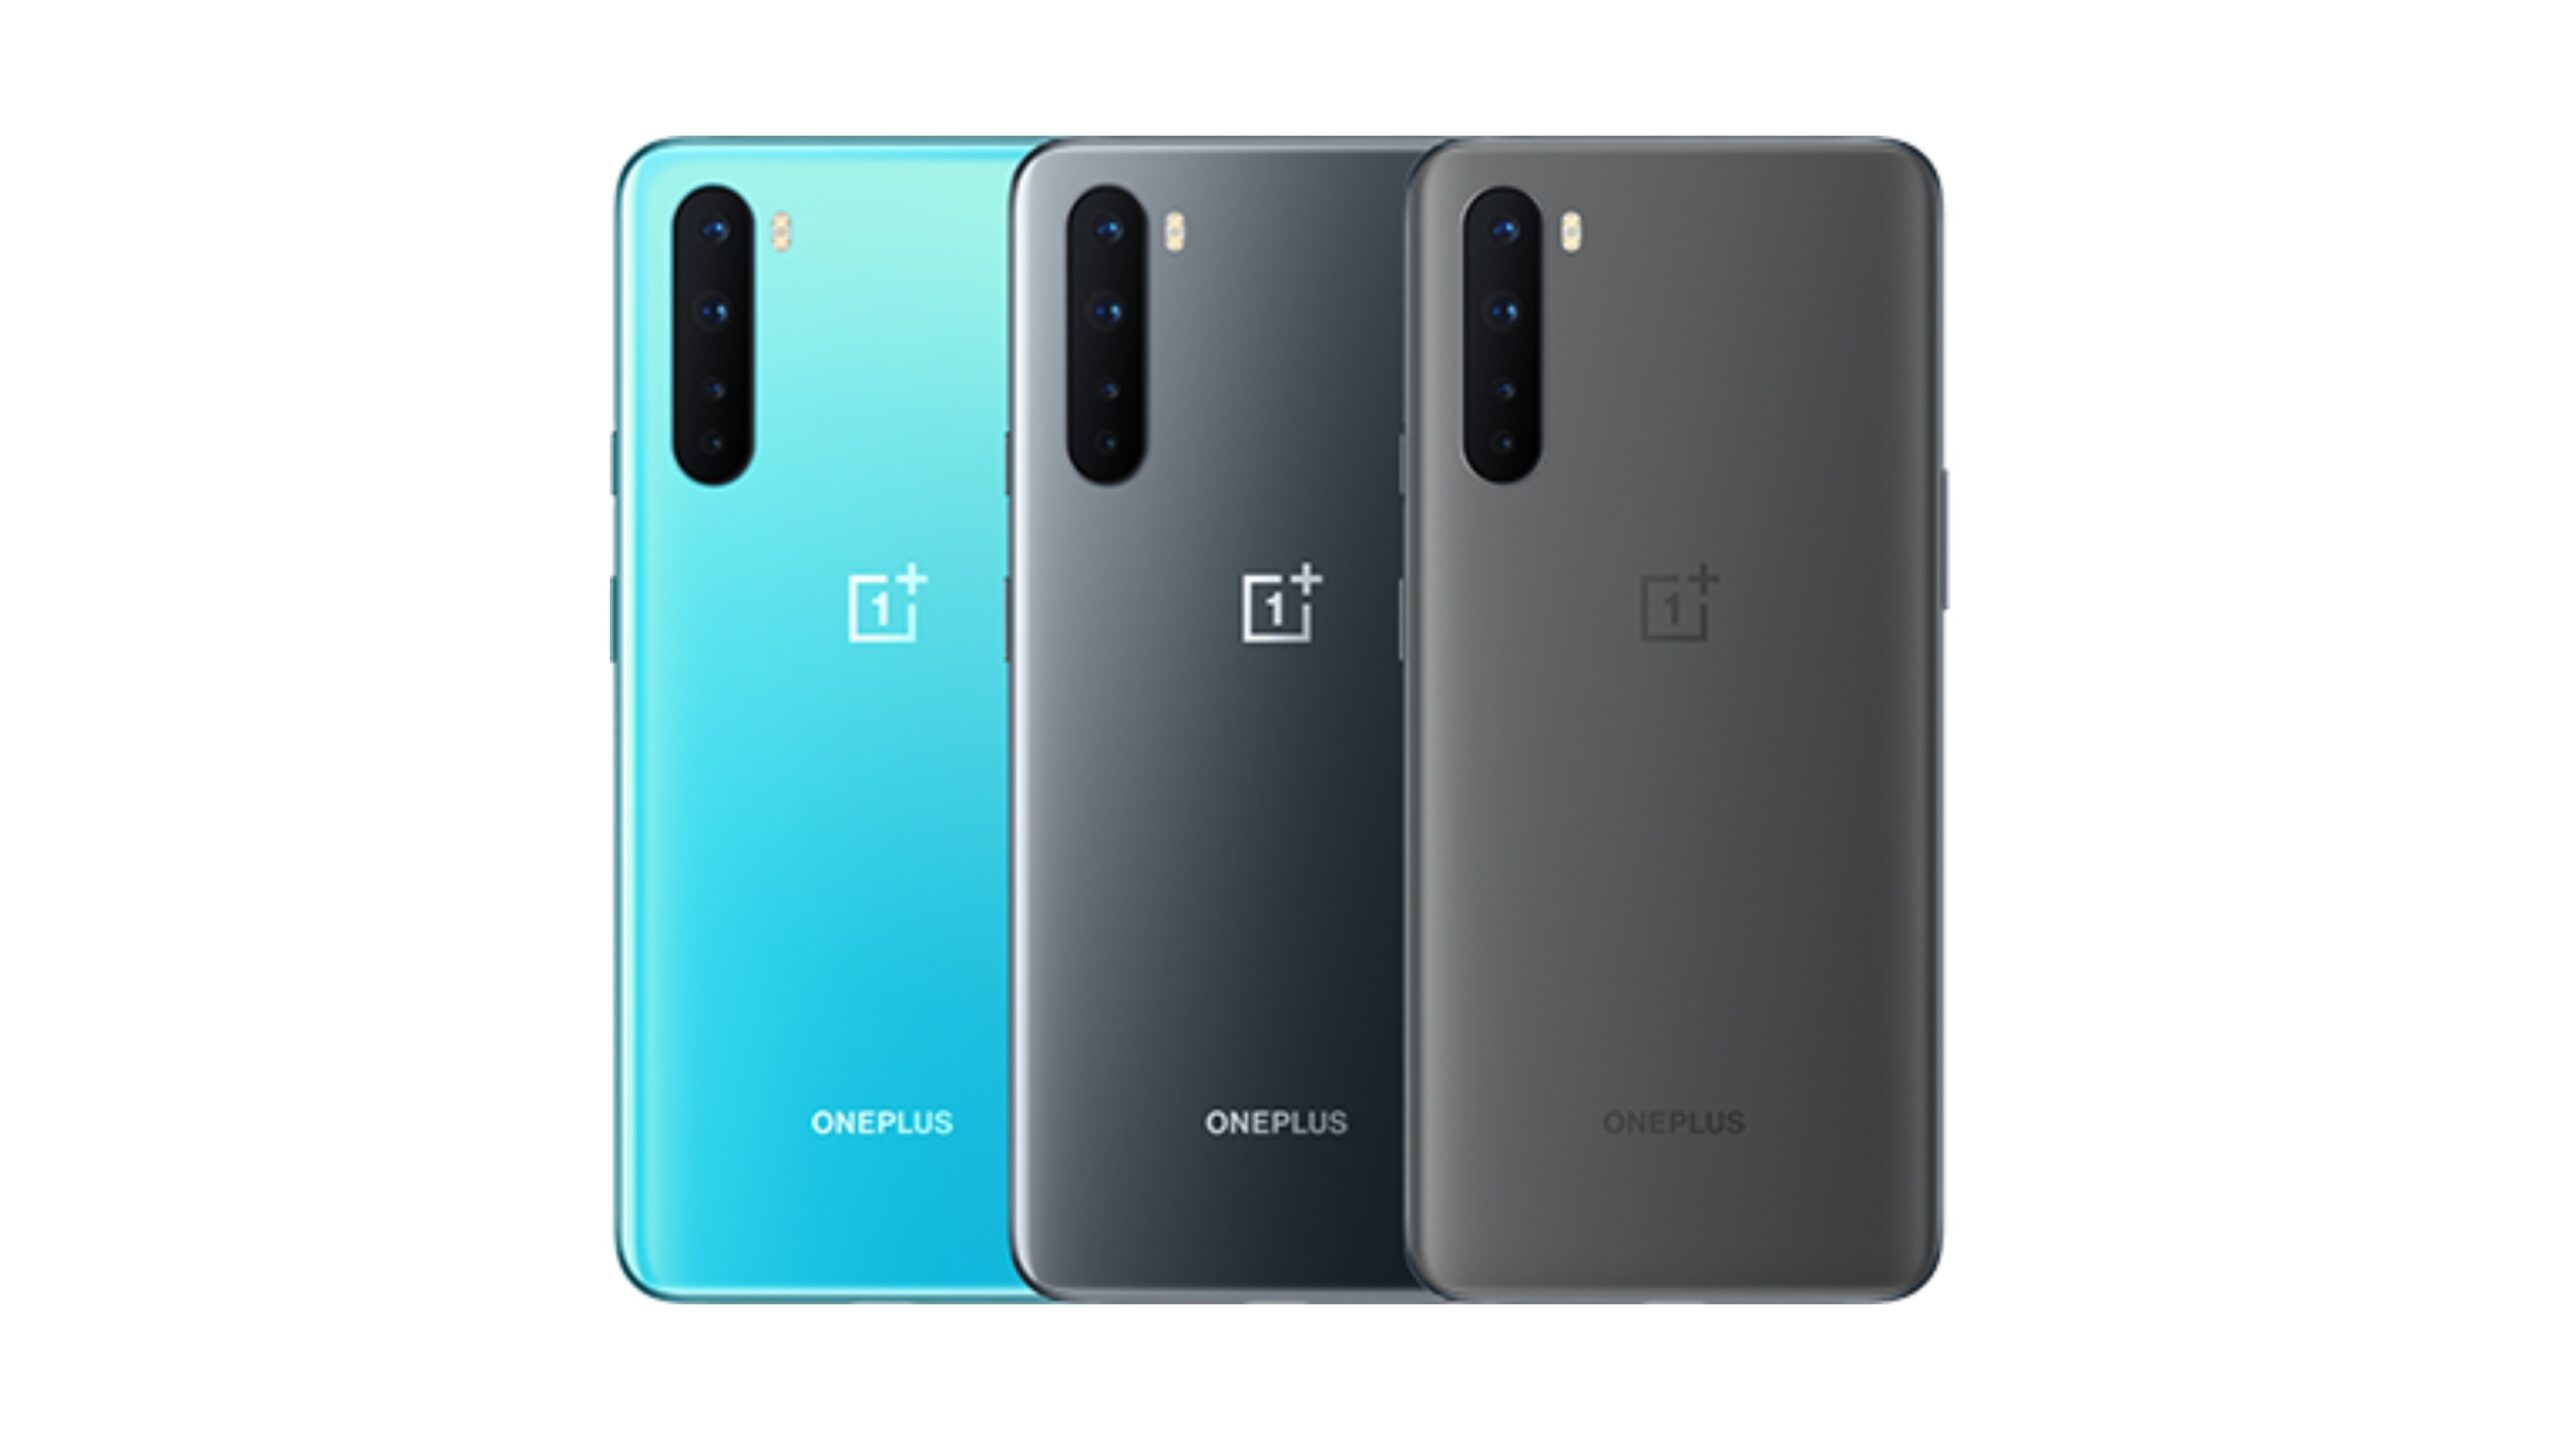 OnePlus Nord gets January 2021 security patches via OxygenOS 10.5.11 update